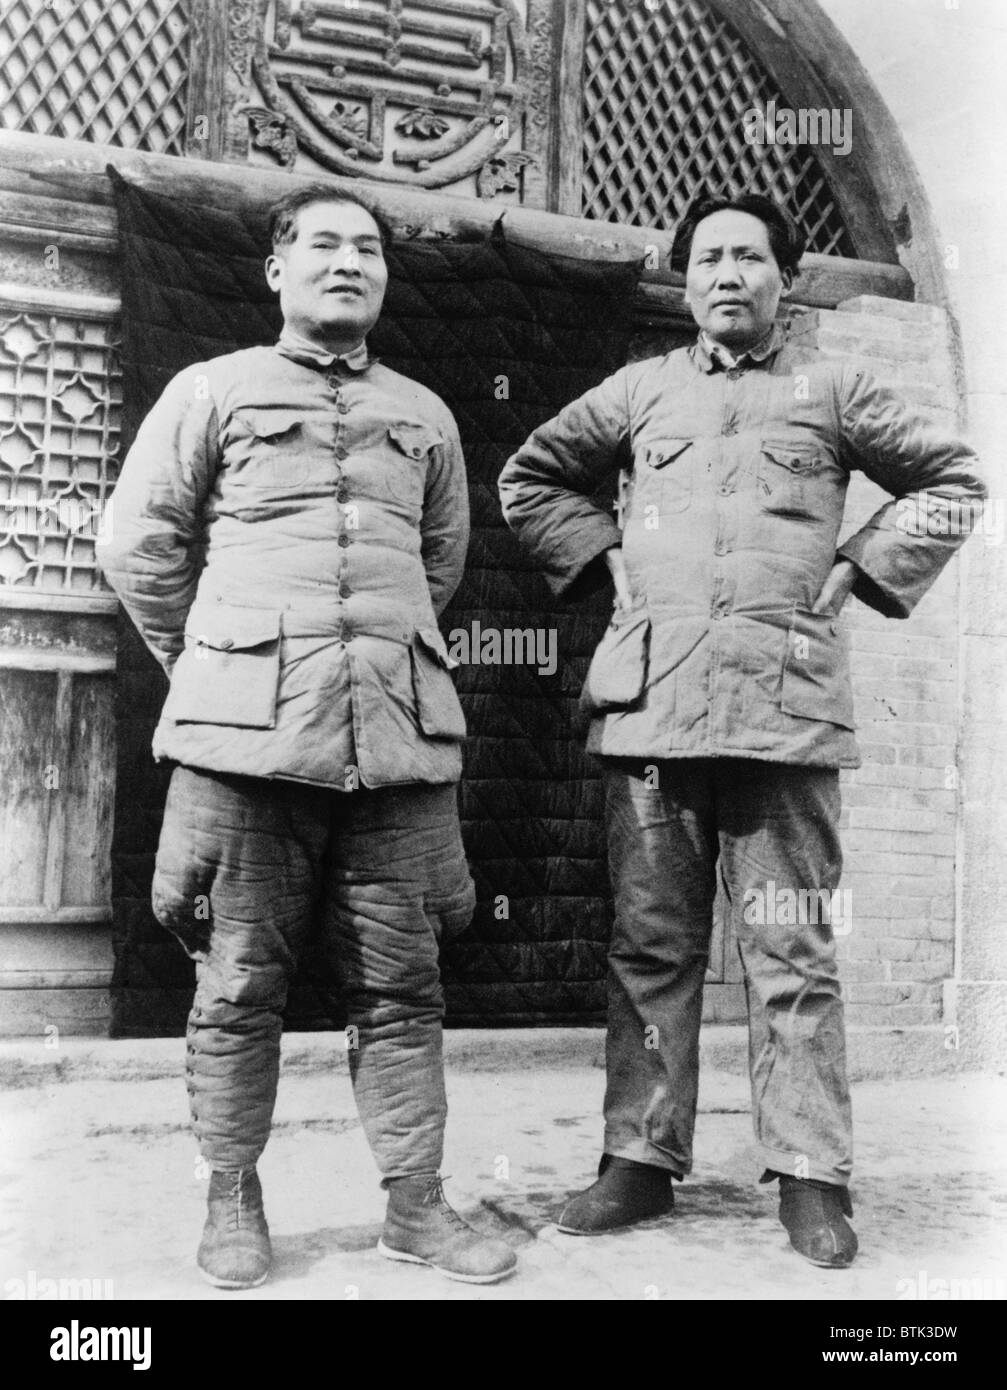 Mao Zedong (1893-1976) and Zhang Guotao (1897-1979), standing in courtyard of the supreme communist headquarters in China in the 1930s. Following the Long March, Zhang unsuccessfully challenged Mao for command of the Communist Army in 1935. Stock Photo